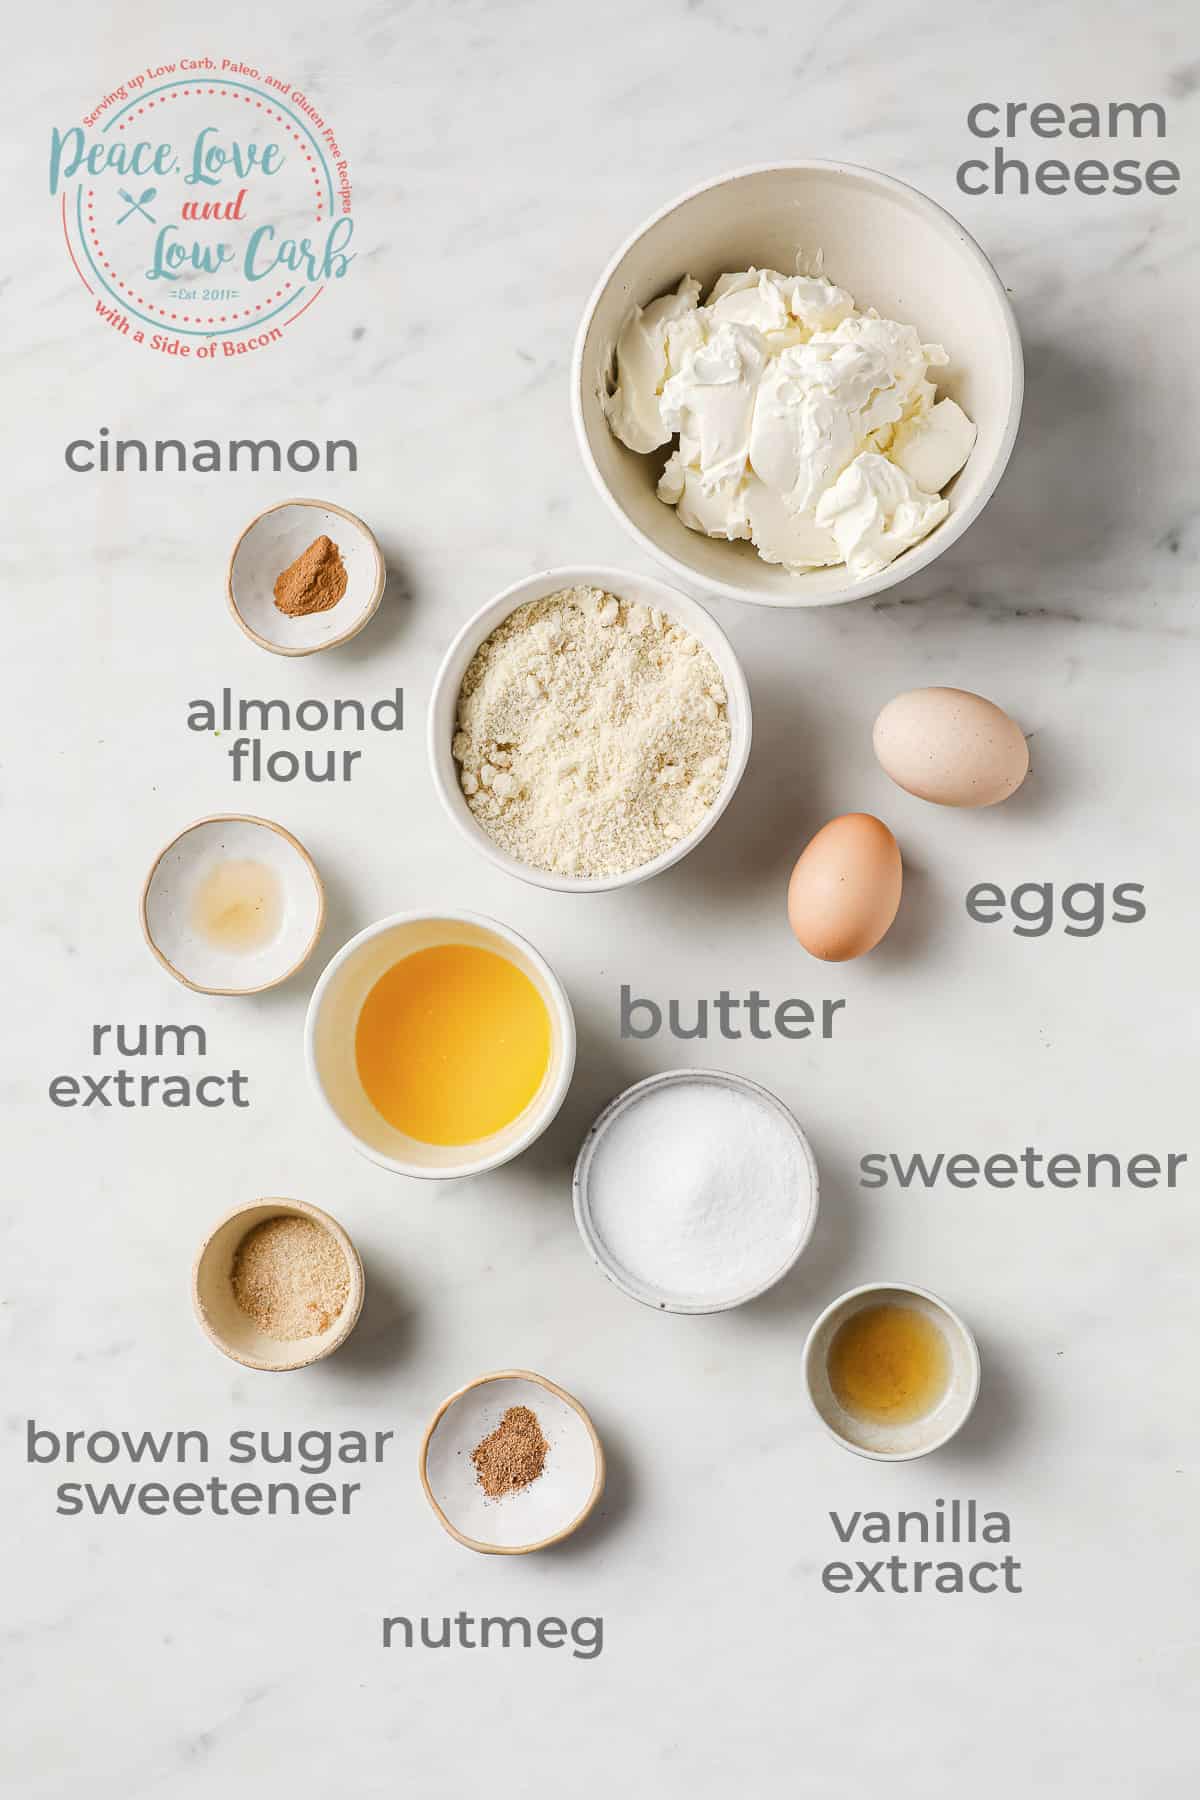 Ingredients all laid out to make mini eggnog cheesecakes - cream cheese, eggs, almond flour, butter, sweetener, spices. 